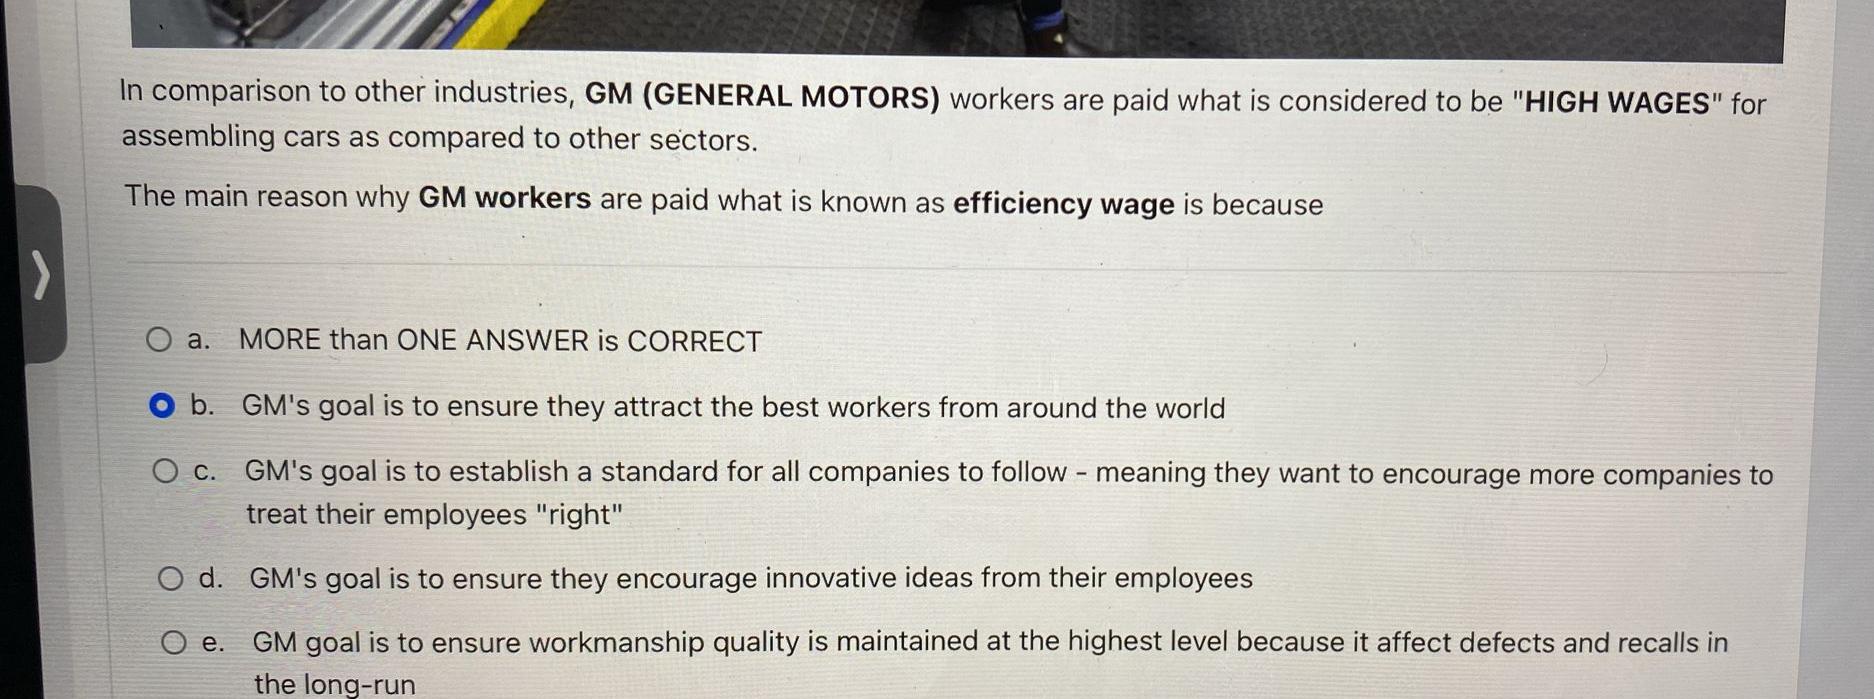 > In comparison to other industries, GM (GENERAL MOTORS) workers are paid what is considered to be 